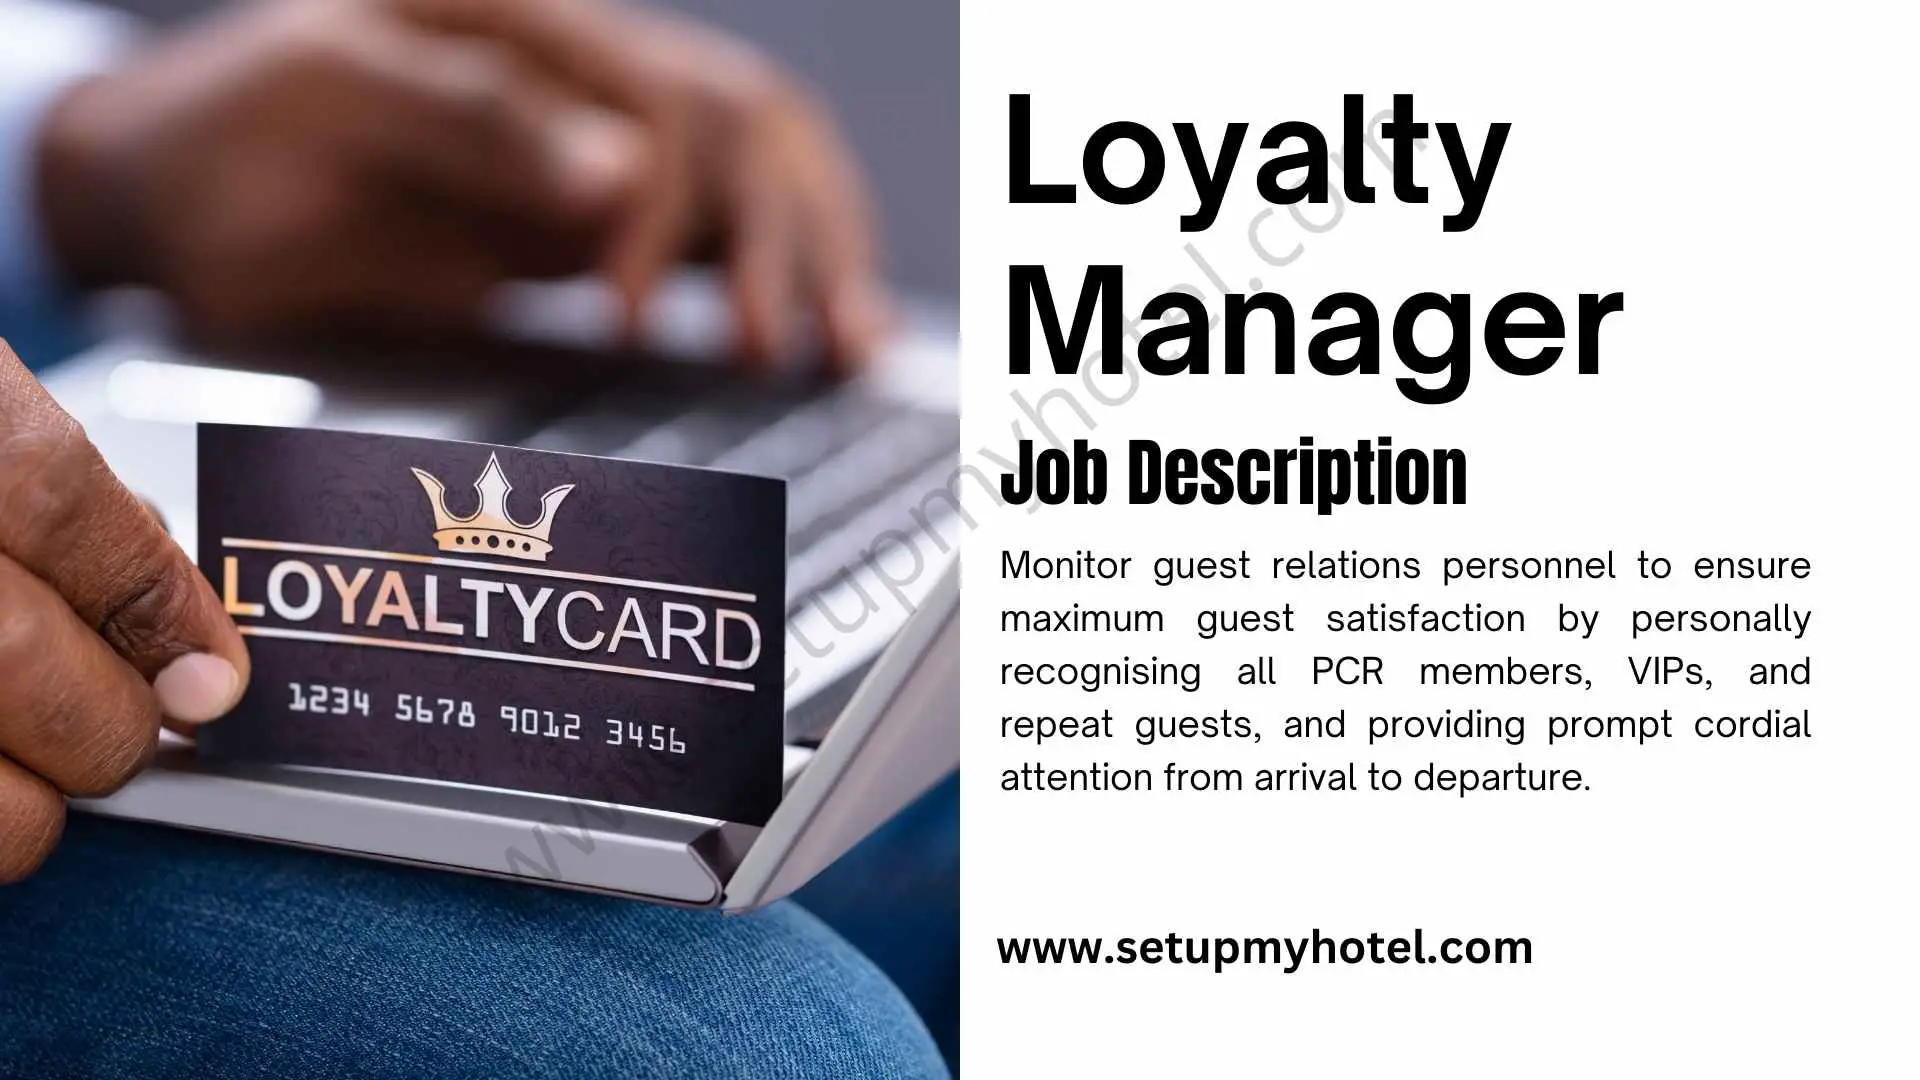 As a Loyalty and Rewards Manager, your primary responsibility will be to develop and implement strategies to increase customer loyalty and engagement. You will also be responsible for managing and administering reward programs to incentivize customer behavior. Your duties will include conducting market research to identify customer preferences and trends, developing and executing loyalty programs that align with the company's brand and values, analyzing customer data to optimize program effectiveness, and collaborating with cross-functional teams to ensure seamless program integration across all customer touchpoints. Additionally, you will be responsible for managing vendor relationships and negotiating contracts to ensure the most cost-effective and impactful program solutions. You will also be responsible for monitoring and reporting on program performance, making recommendations for improvement, and communicating program updates and successes to key stakeholders. To excel in this role, you should have a strong understanding of customer behavior and engagement, as well as experience in program management, data analysis, and vendor management. You should also possess excellent communication and collaboration skills, as this role requires cross-functional teamwork and stakeholder engagement. Overall, as a Loyalty and Rewards Manager, you will play a critical role in driving customer loyalty and engagement, and ultimately, contributing to the success of the company.